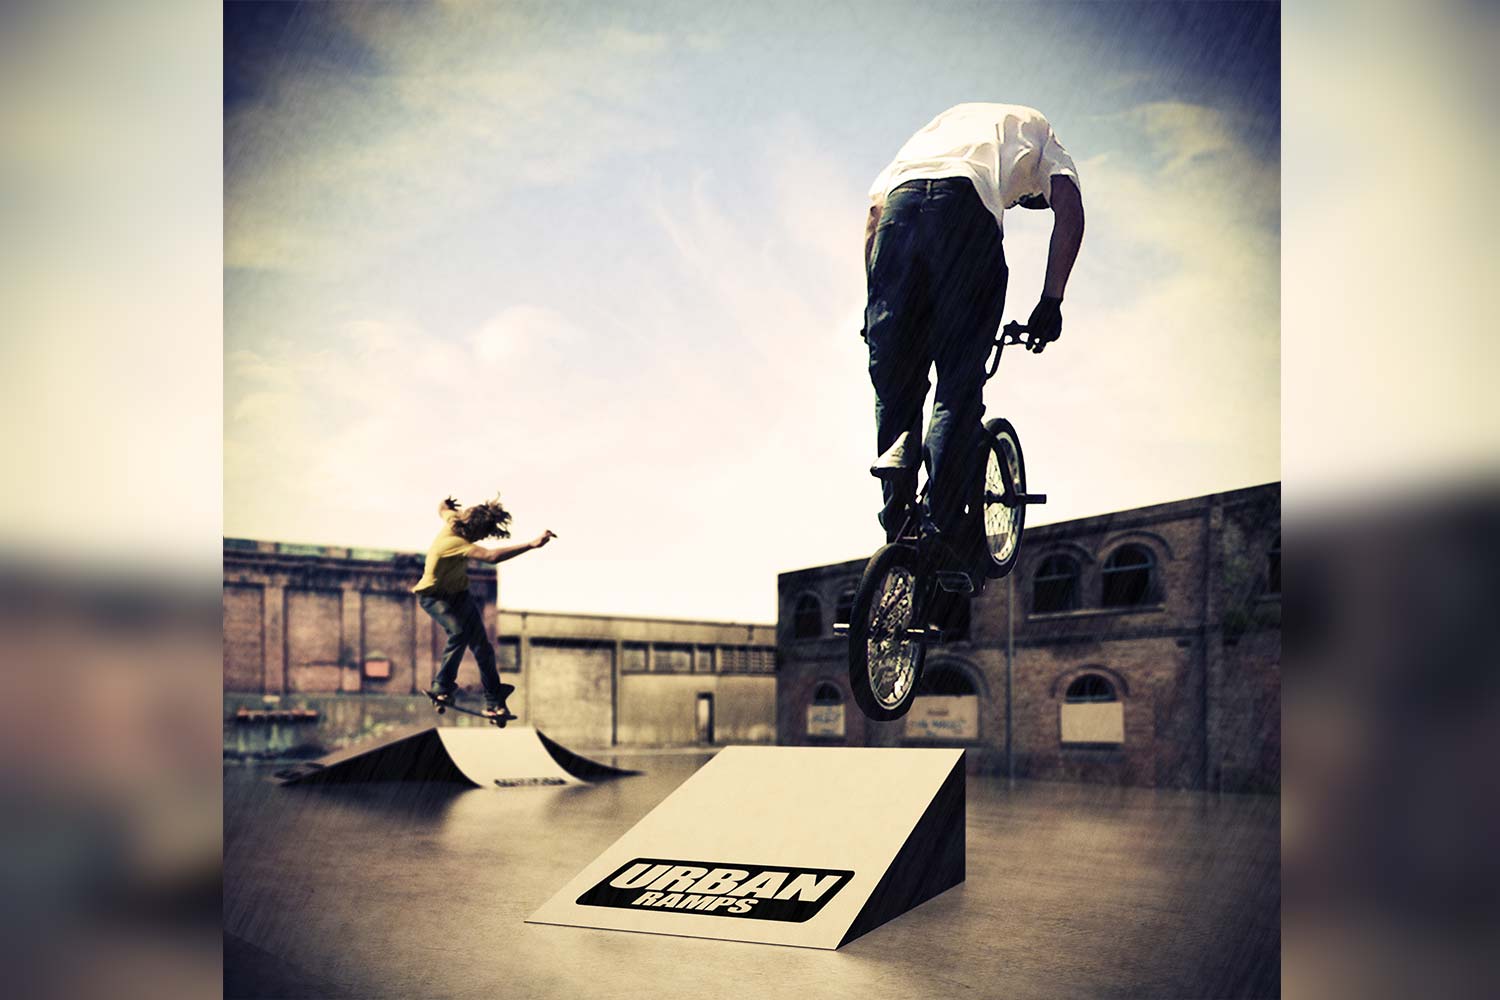 This is 3D rendered scene with photographs of a BMXer and Skater imposed on the shot.